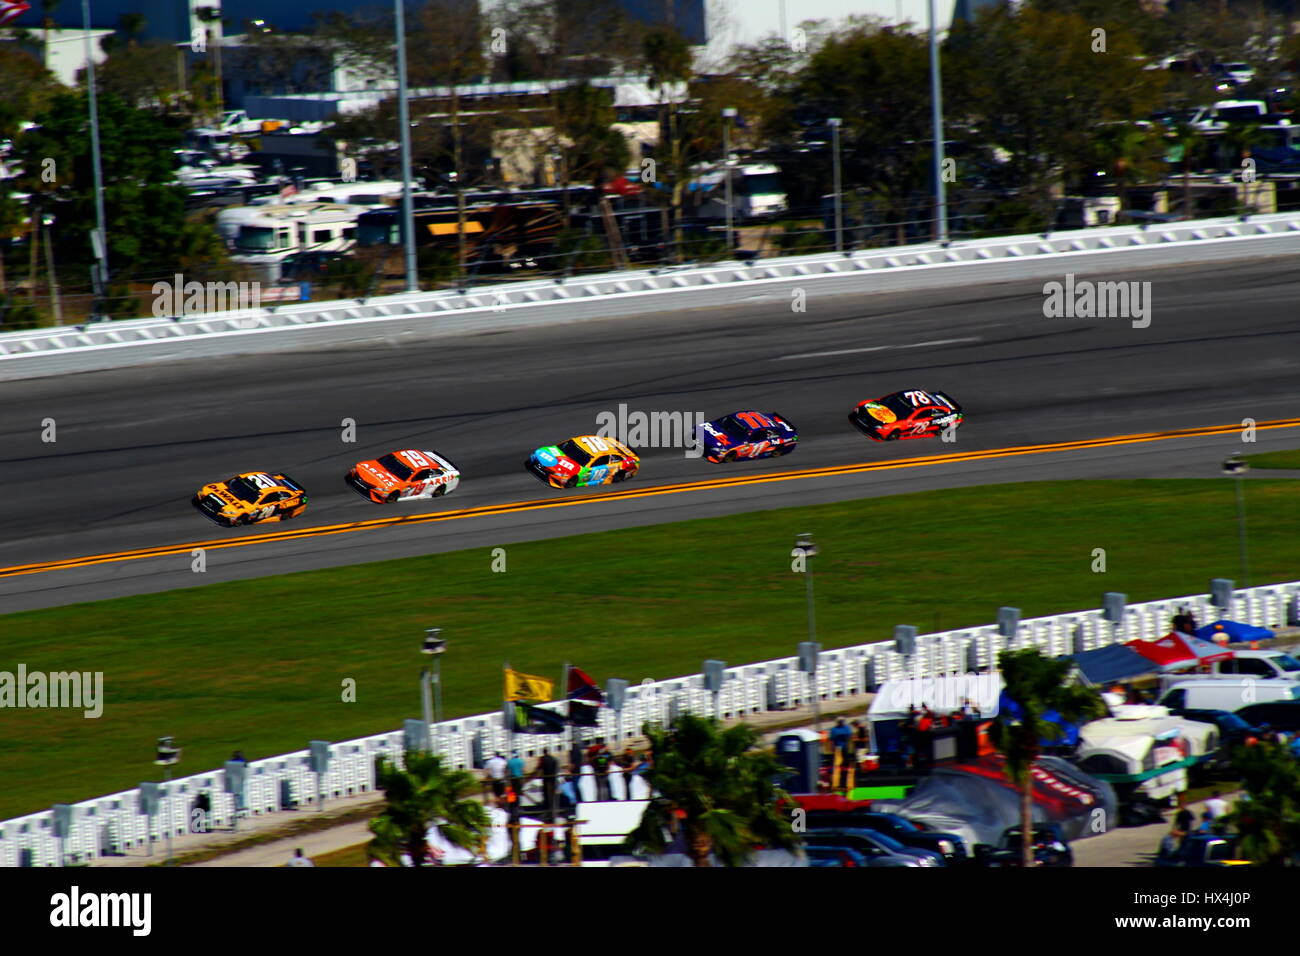 Great view of the toyota nascars working together during the 2017 daytona 500. Stock Photo